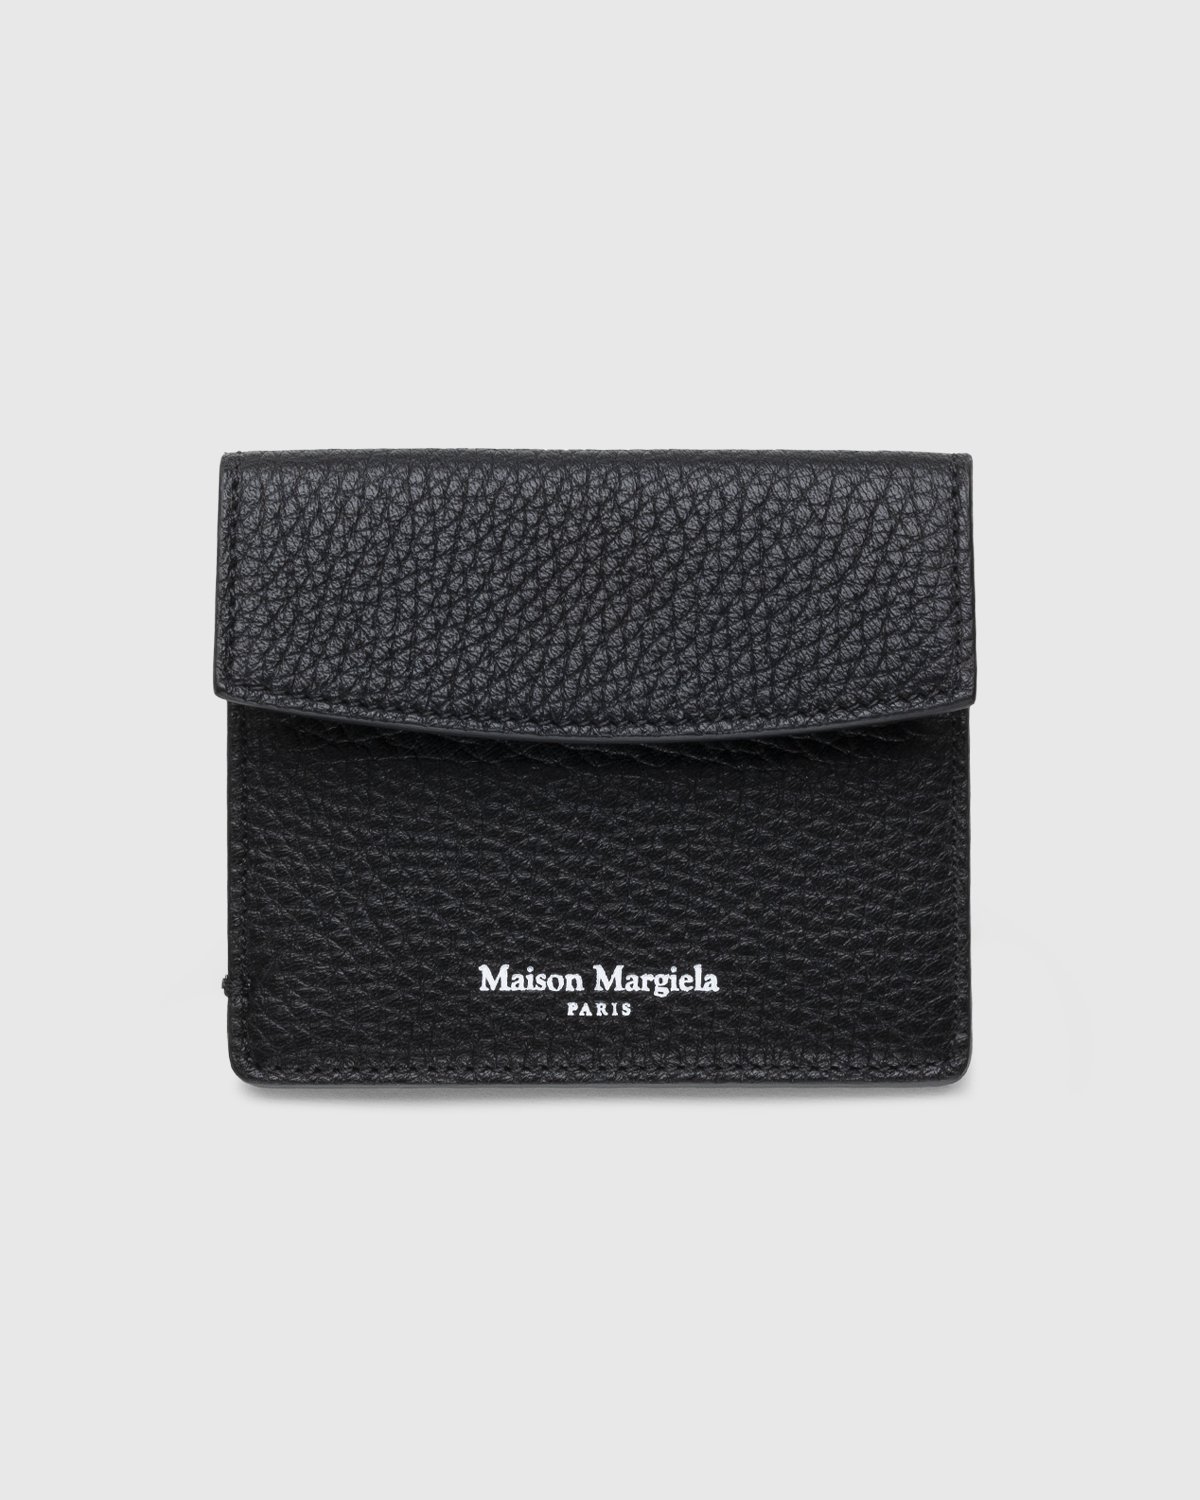 Maison Margiela - Coin and Card Holder Black - Accessories - Black - Image 1